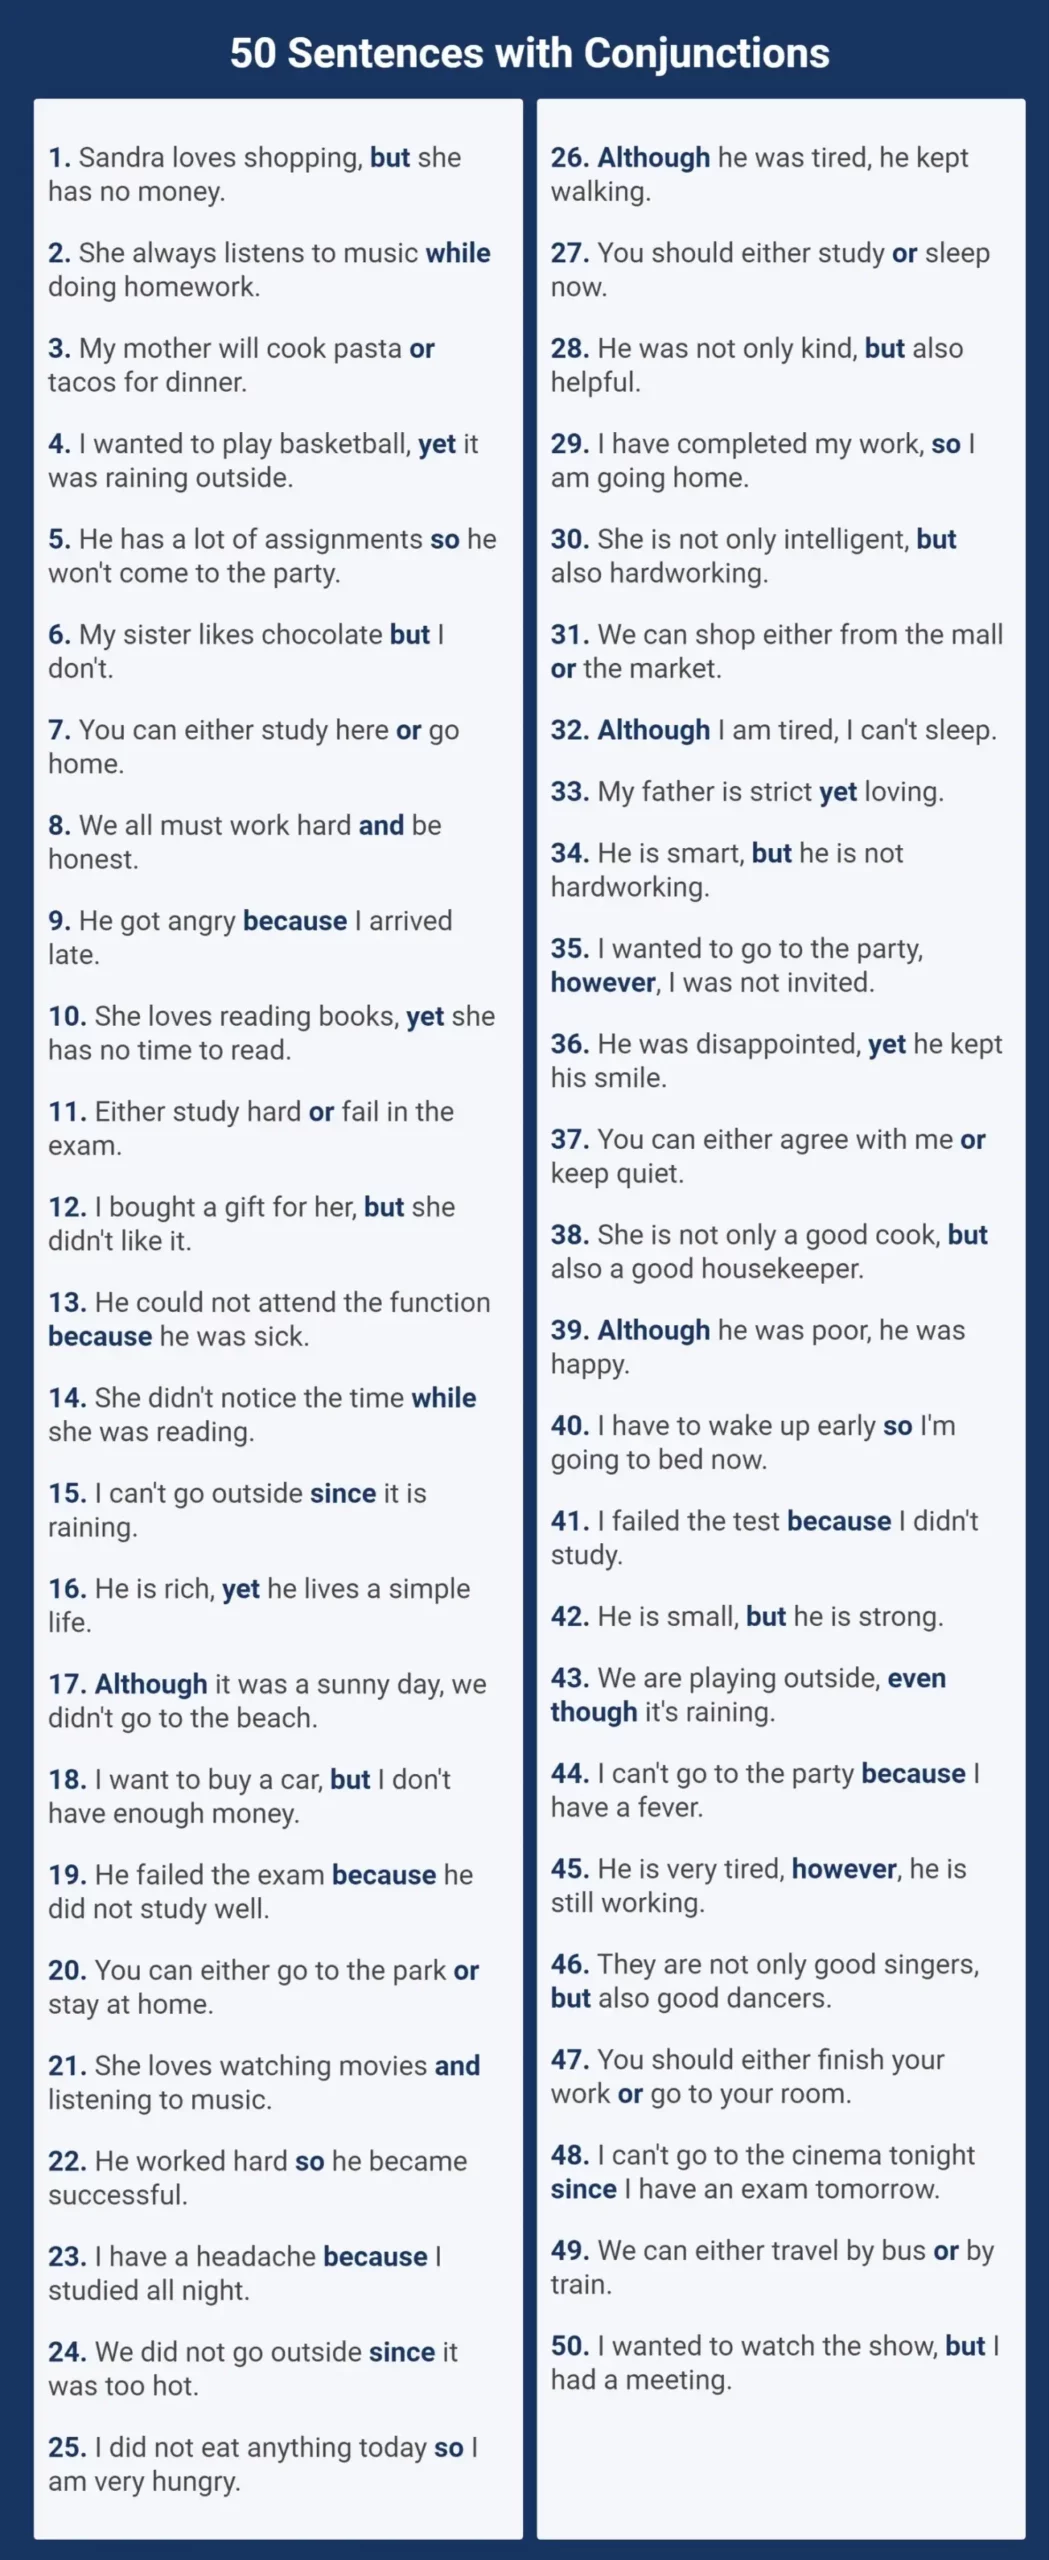 50 Sentences with conjunctions full